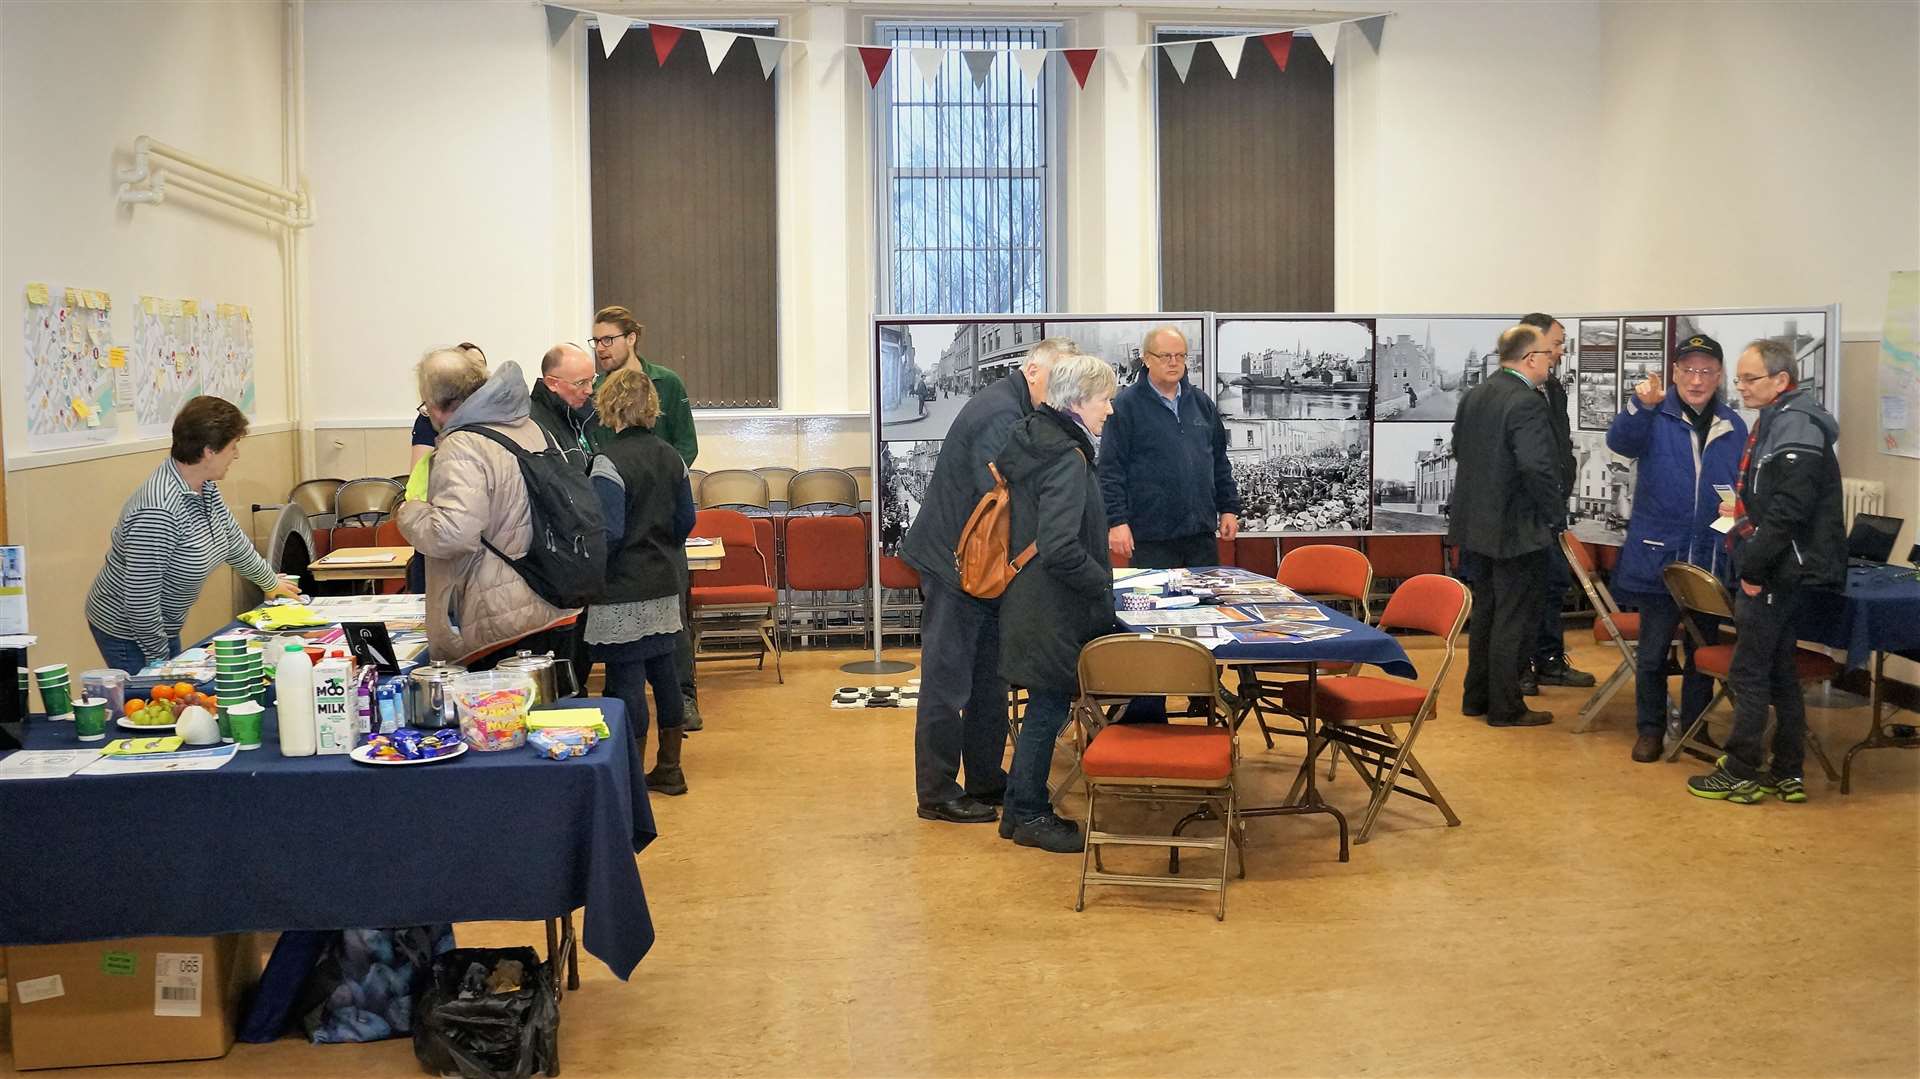 The Sustrans public event on Thursday had many visit over the two sessions held that day. Pictures: DGS